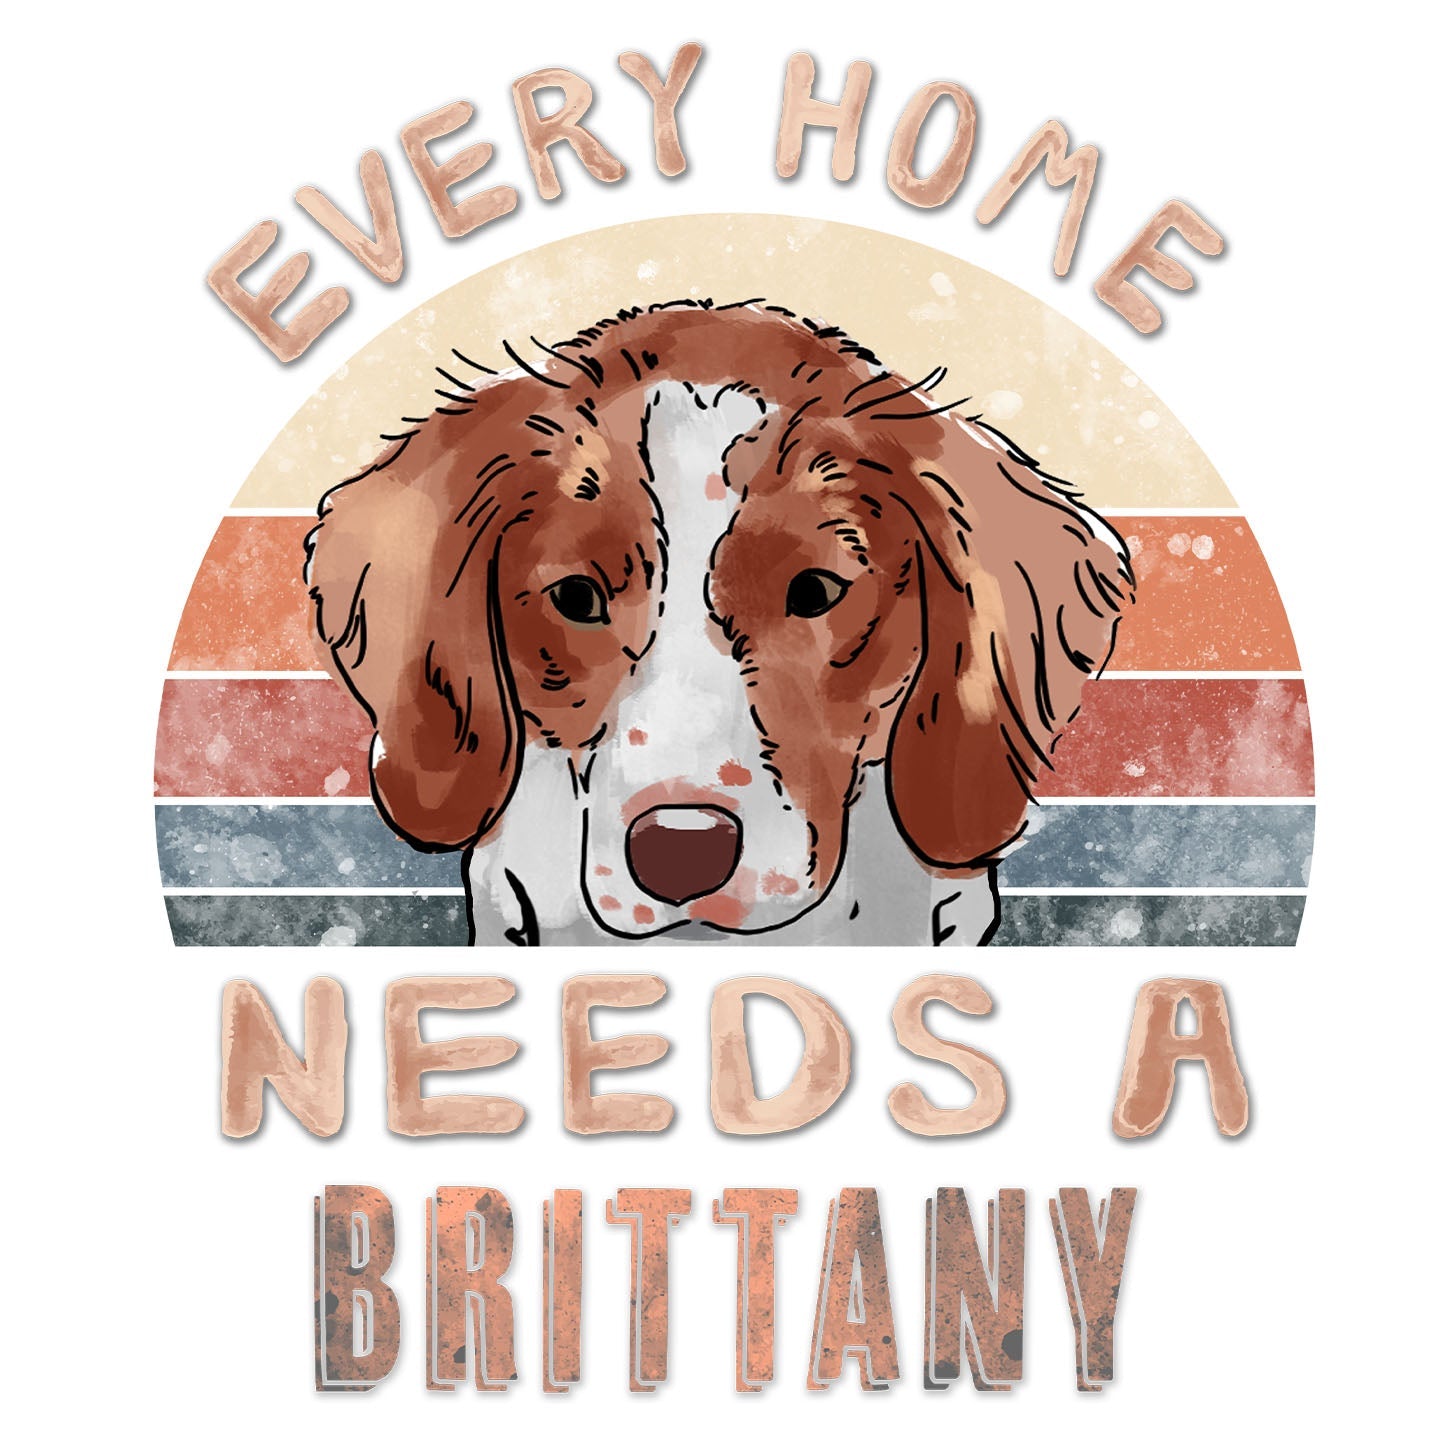 Every Home Needs a Brittany - Women's V-Neck T-Shirt